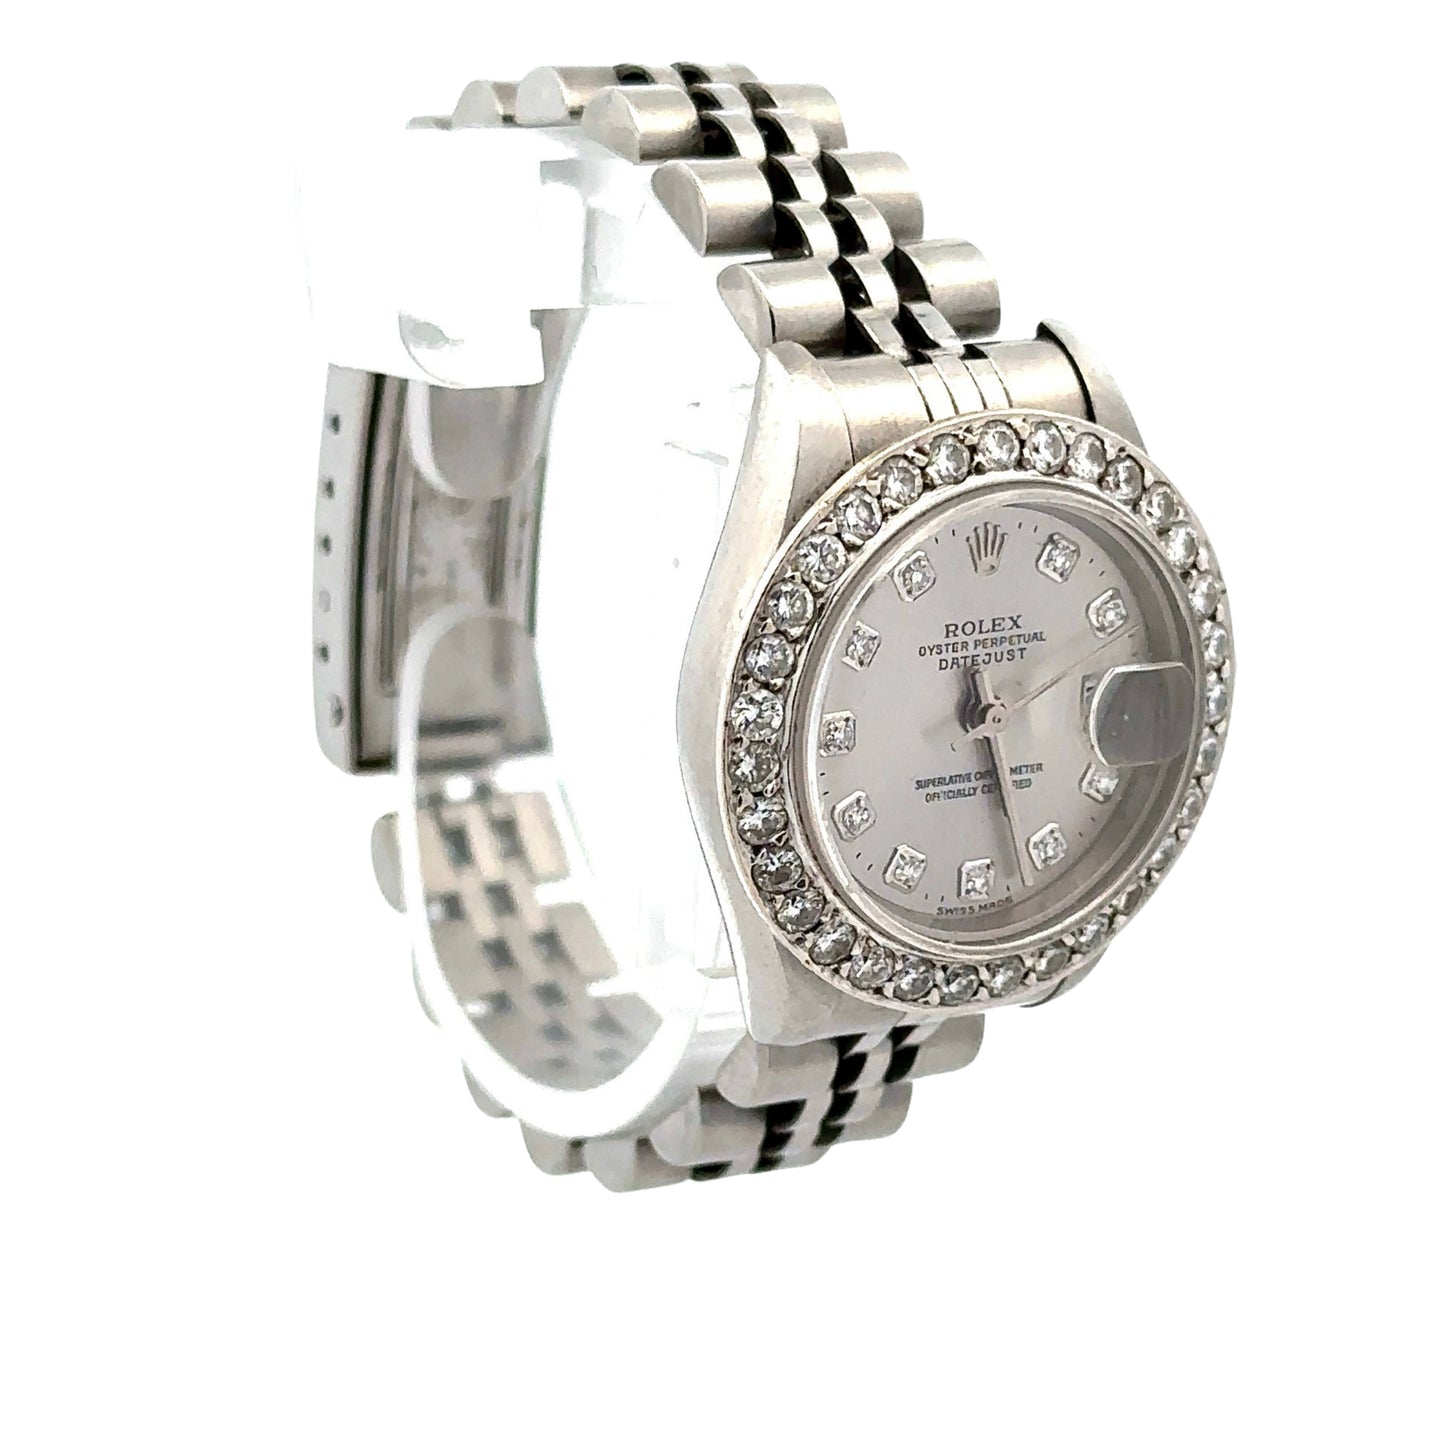 Diagonal view of Rolex Lady Datejust with diamonds on the bezel, diamond hour markers, jubilee band and grey dial.